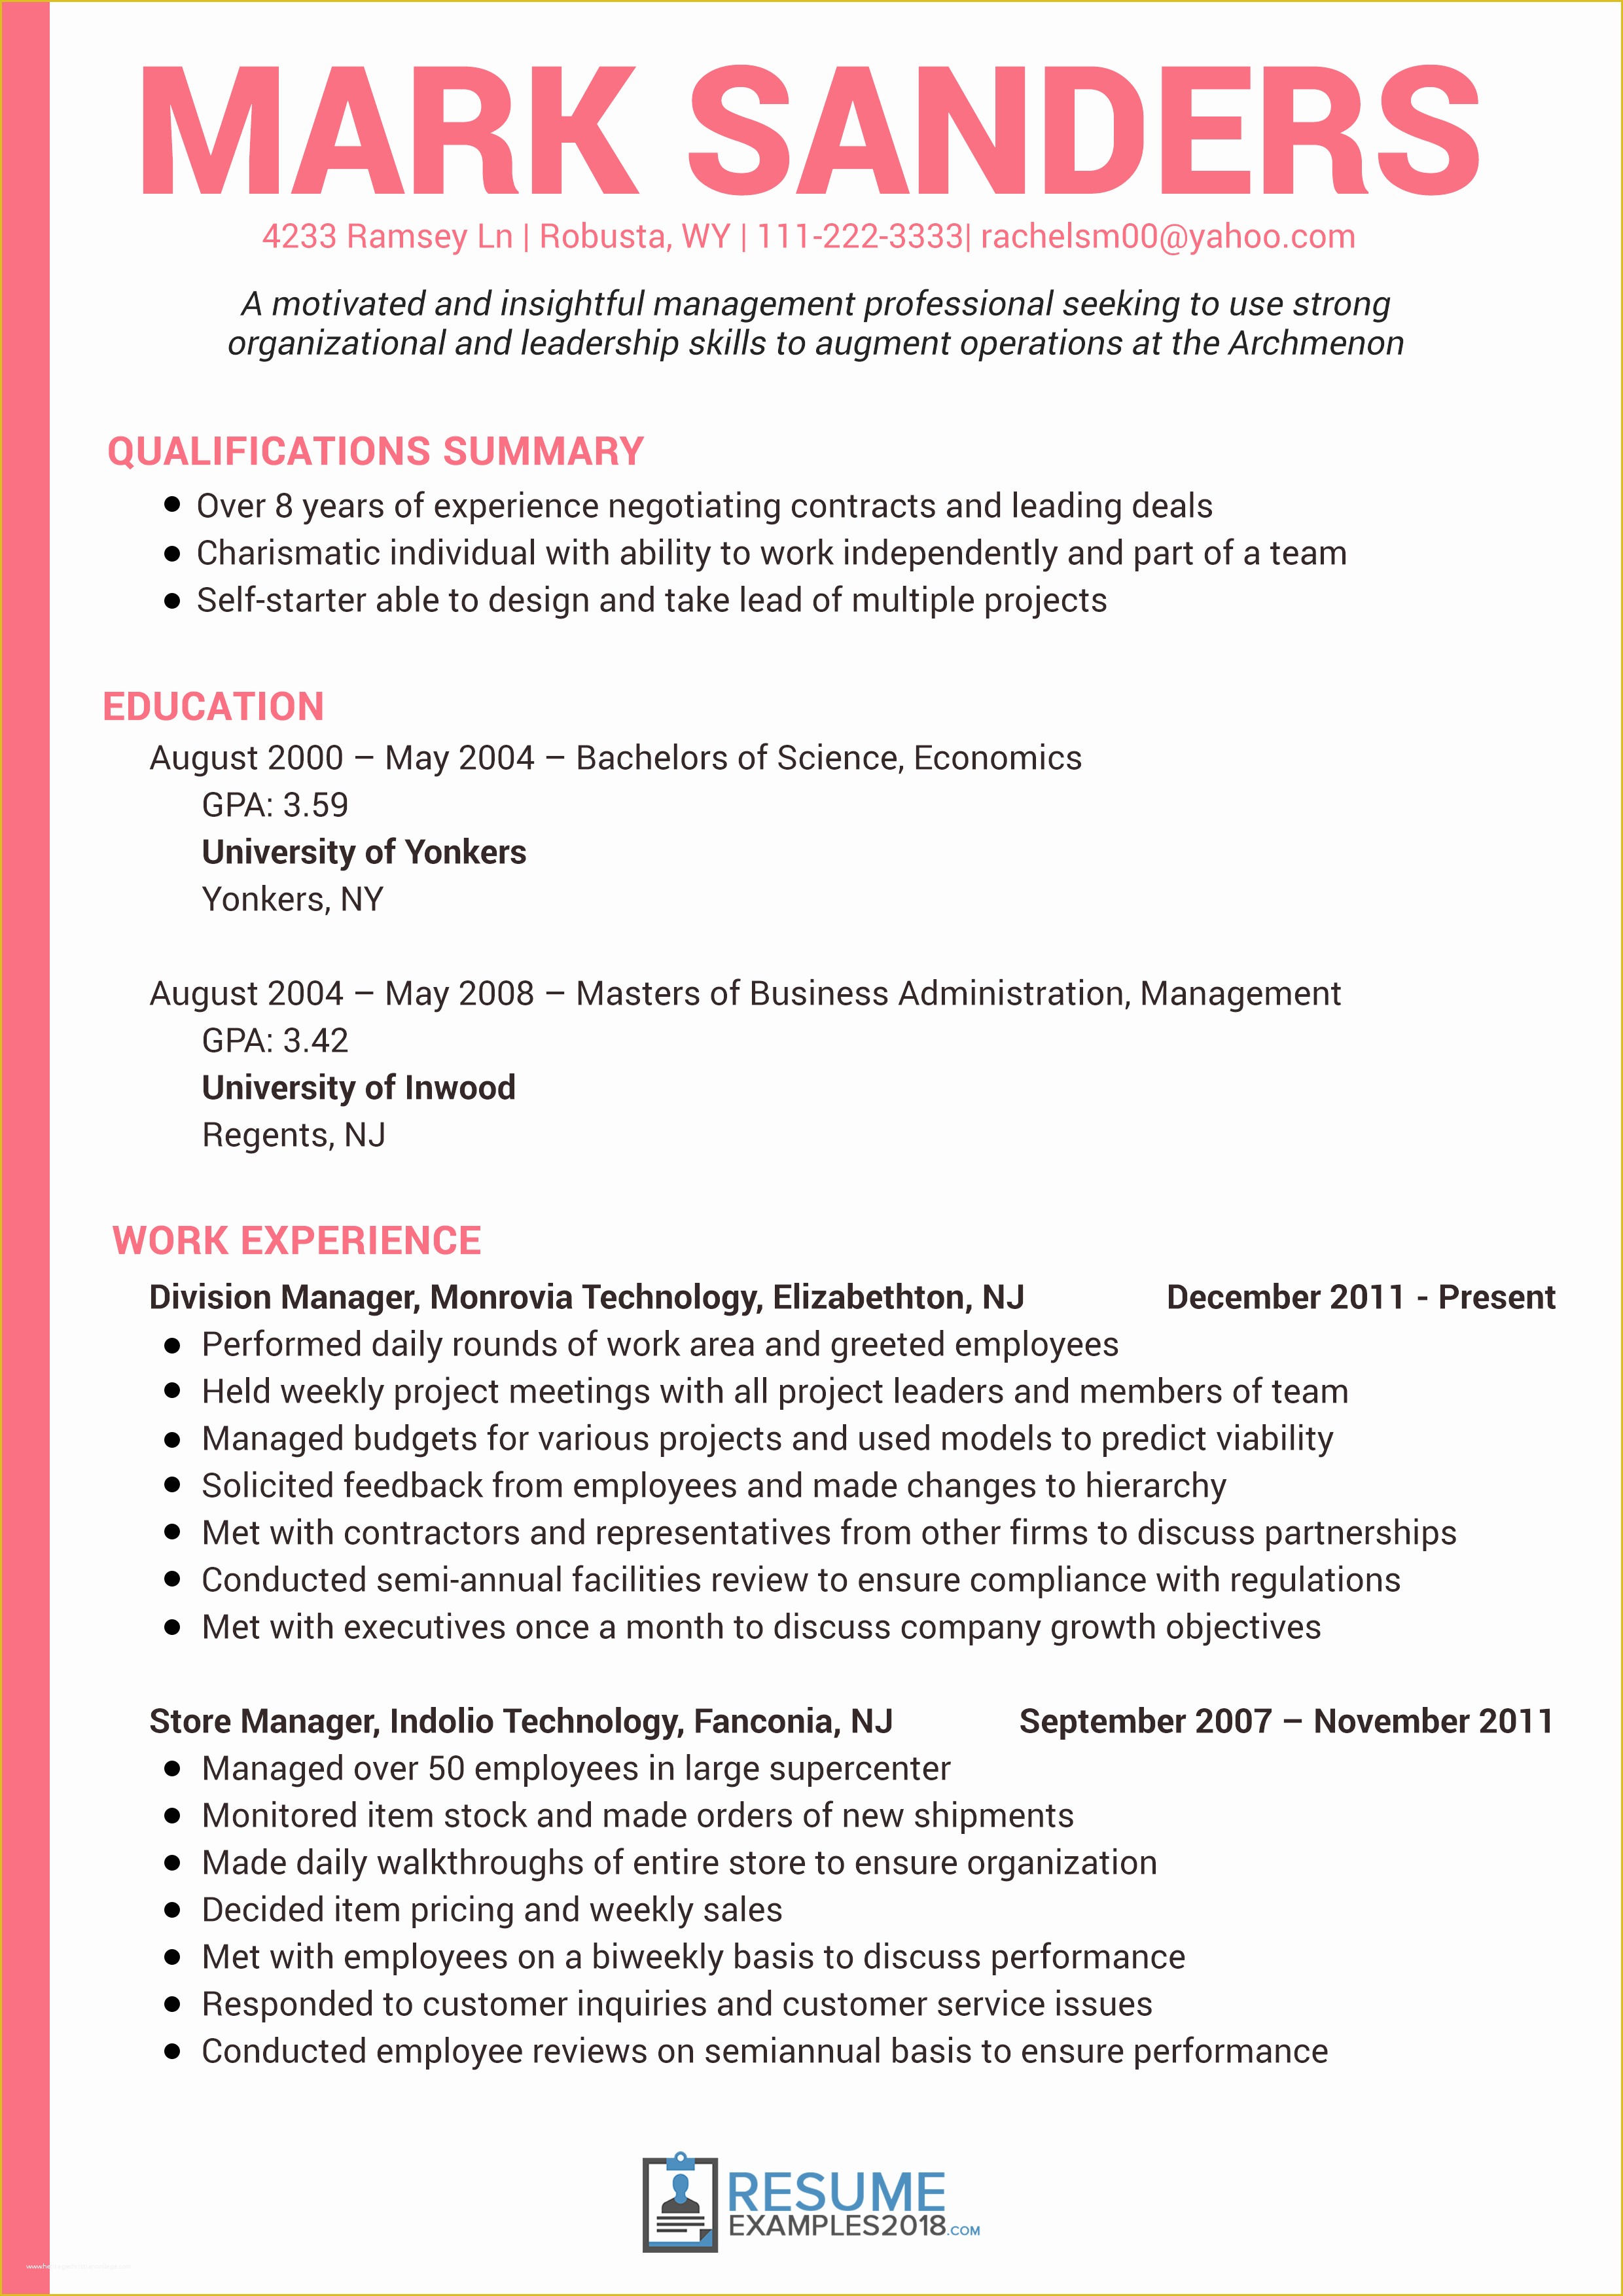 Free Business Resume Template 2018 Of Get Better Results with Management Resume Examples 2019